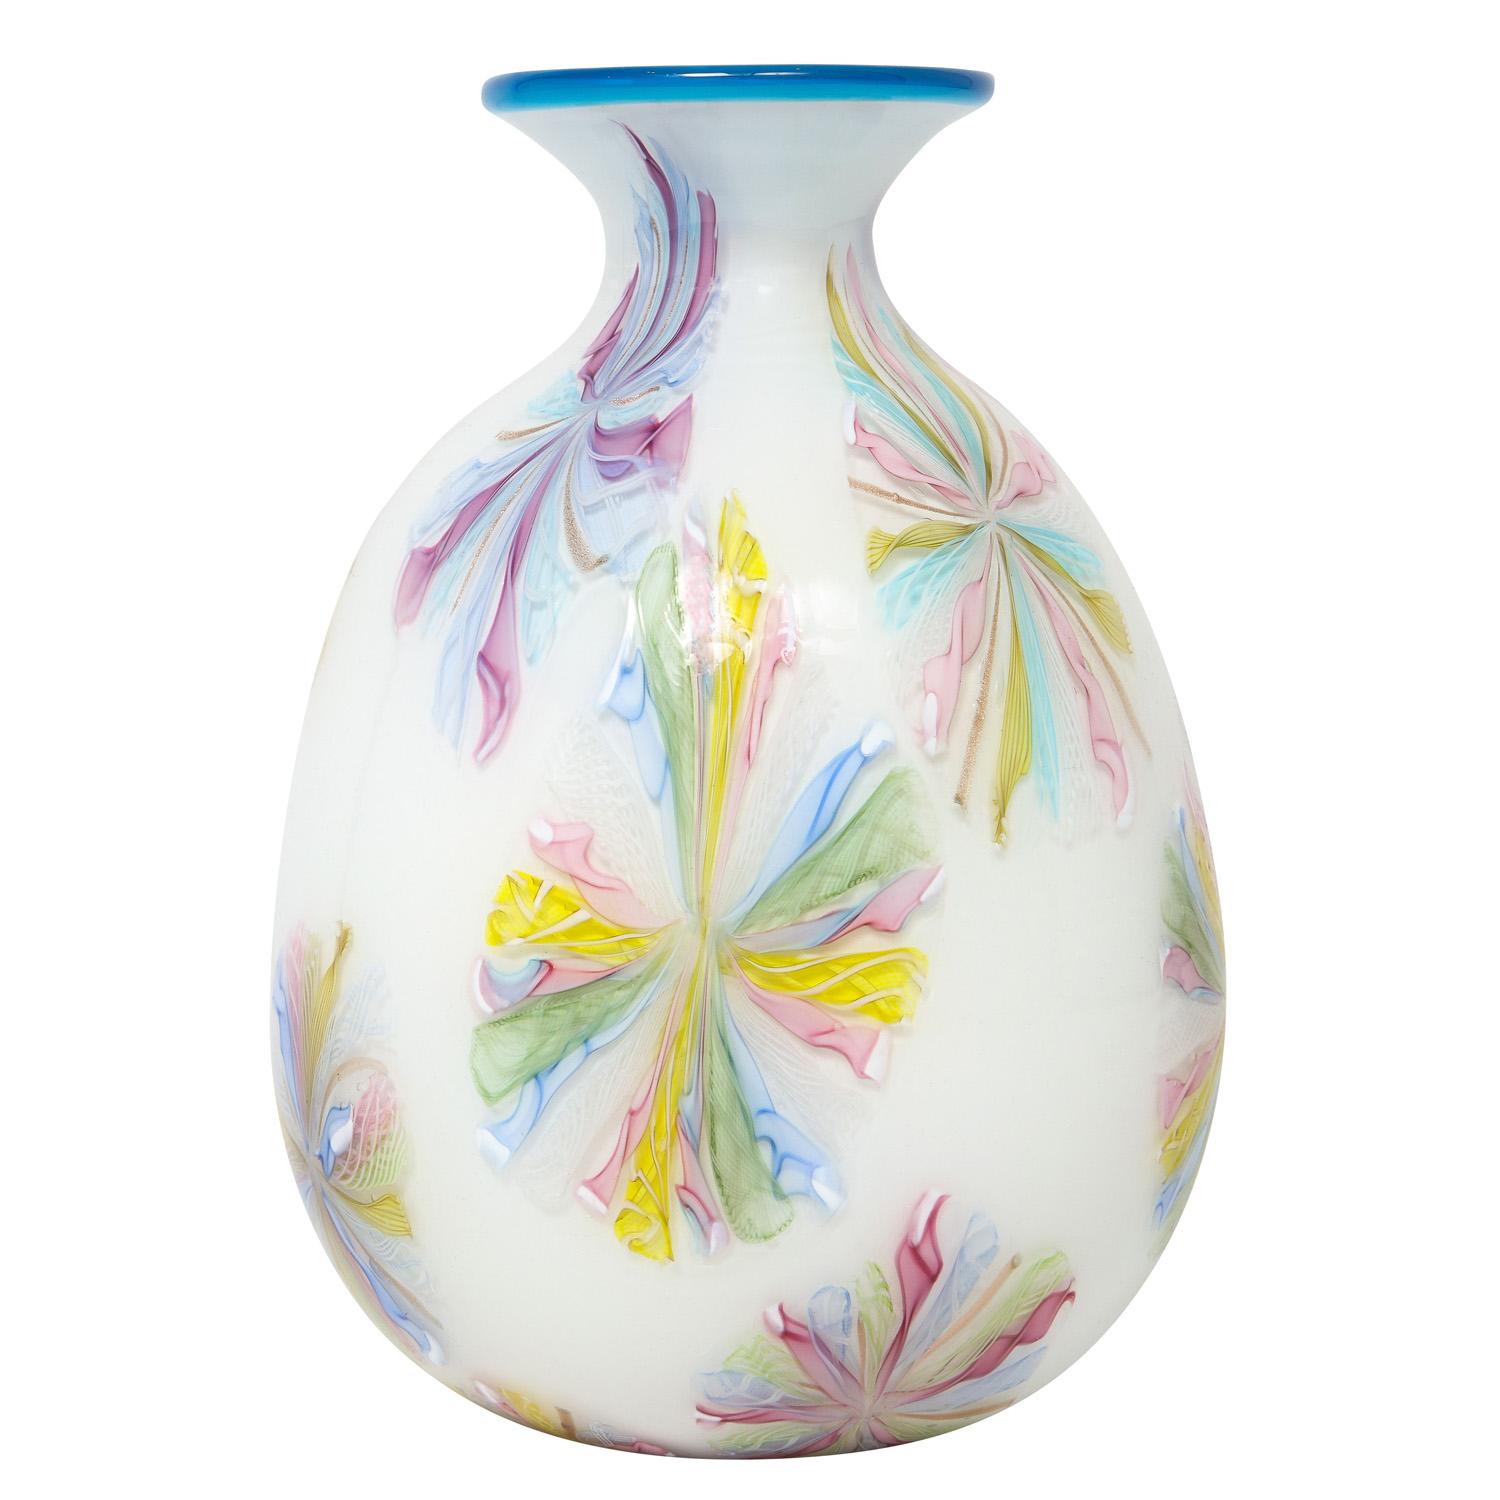 Hand-blown glass vase, colorful starburst murrhines over white glass with blue rim, by Arte Vetraria Muranese or A.V.E.M., Murano Italy, 1950's. This vase is like a jewel. We have a few of this series and each one is unique in its own